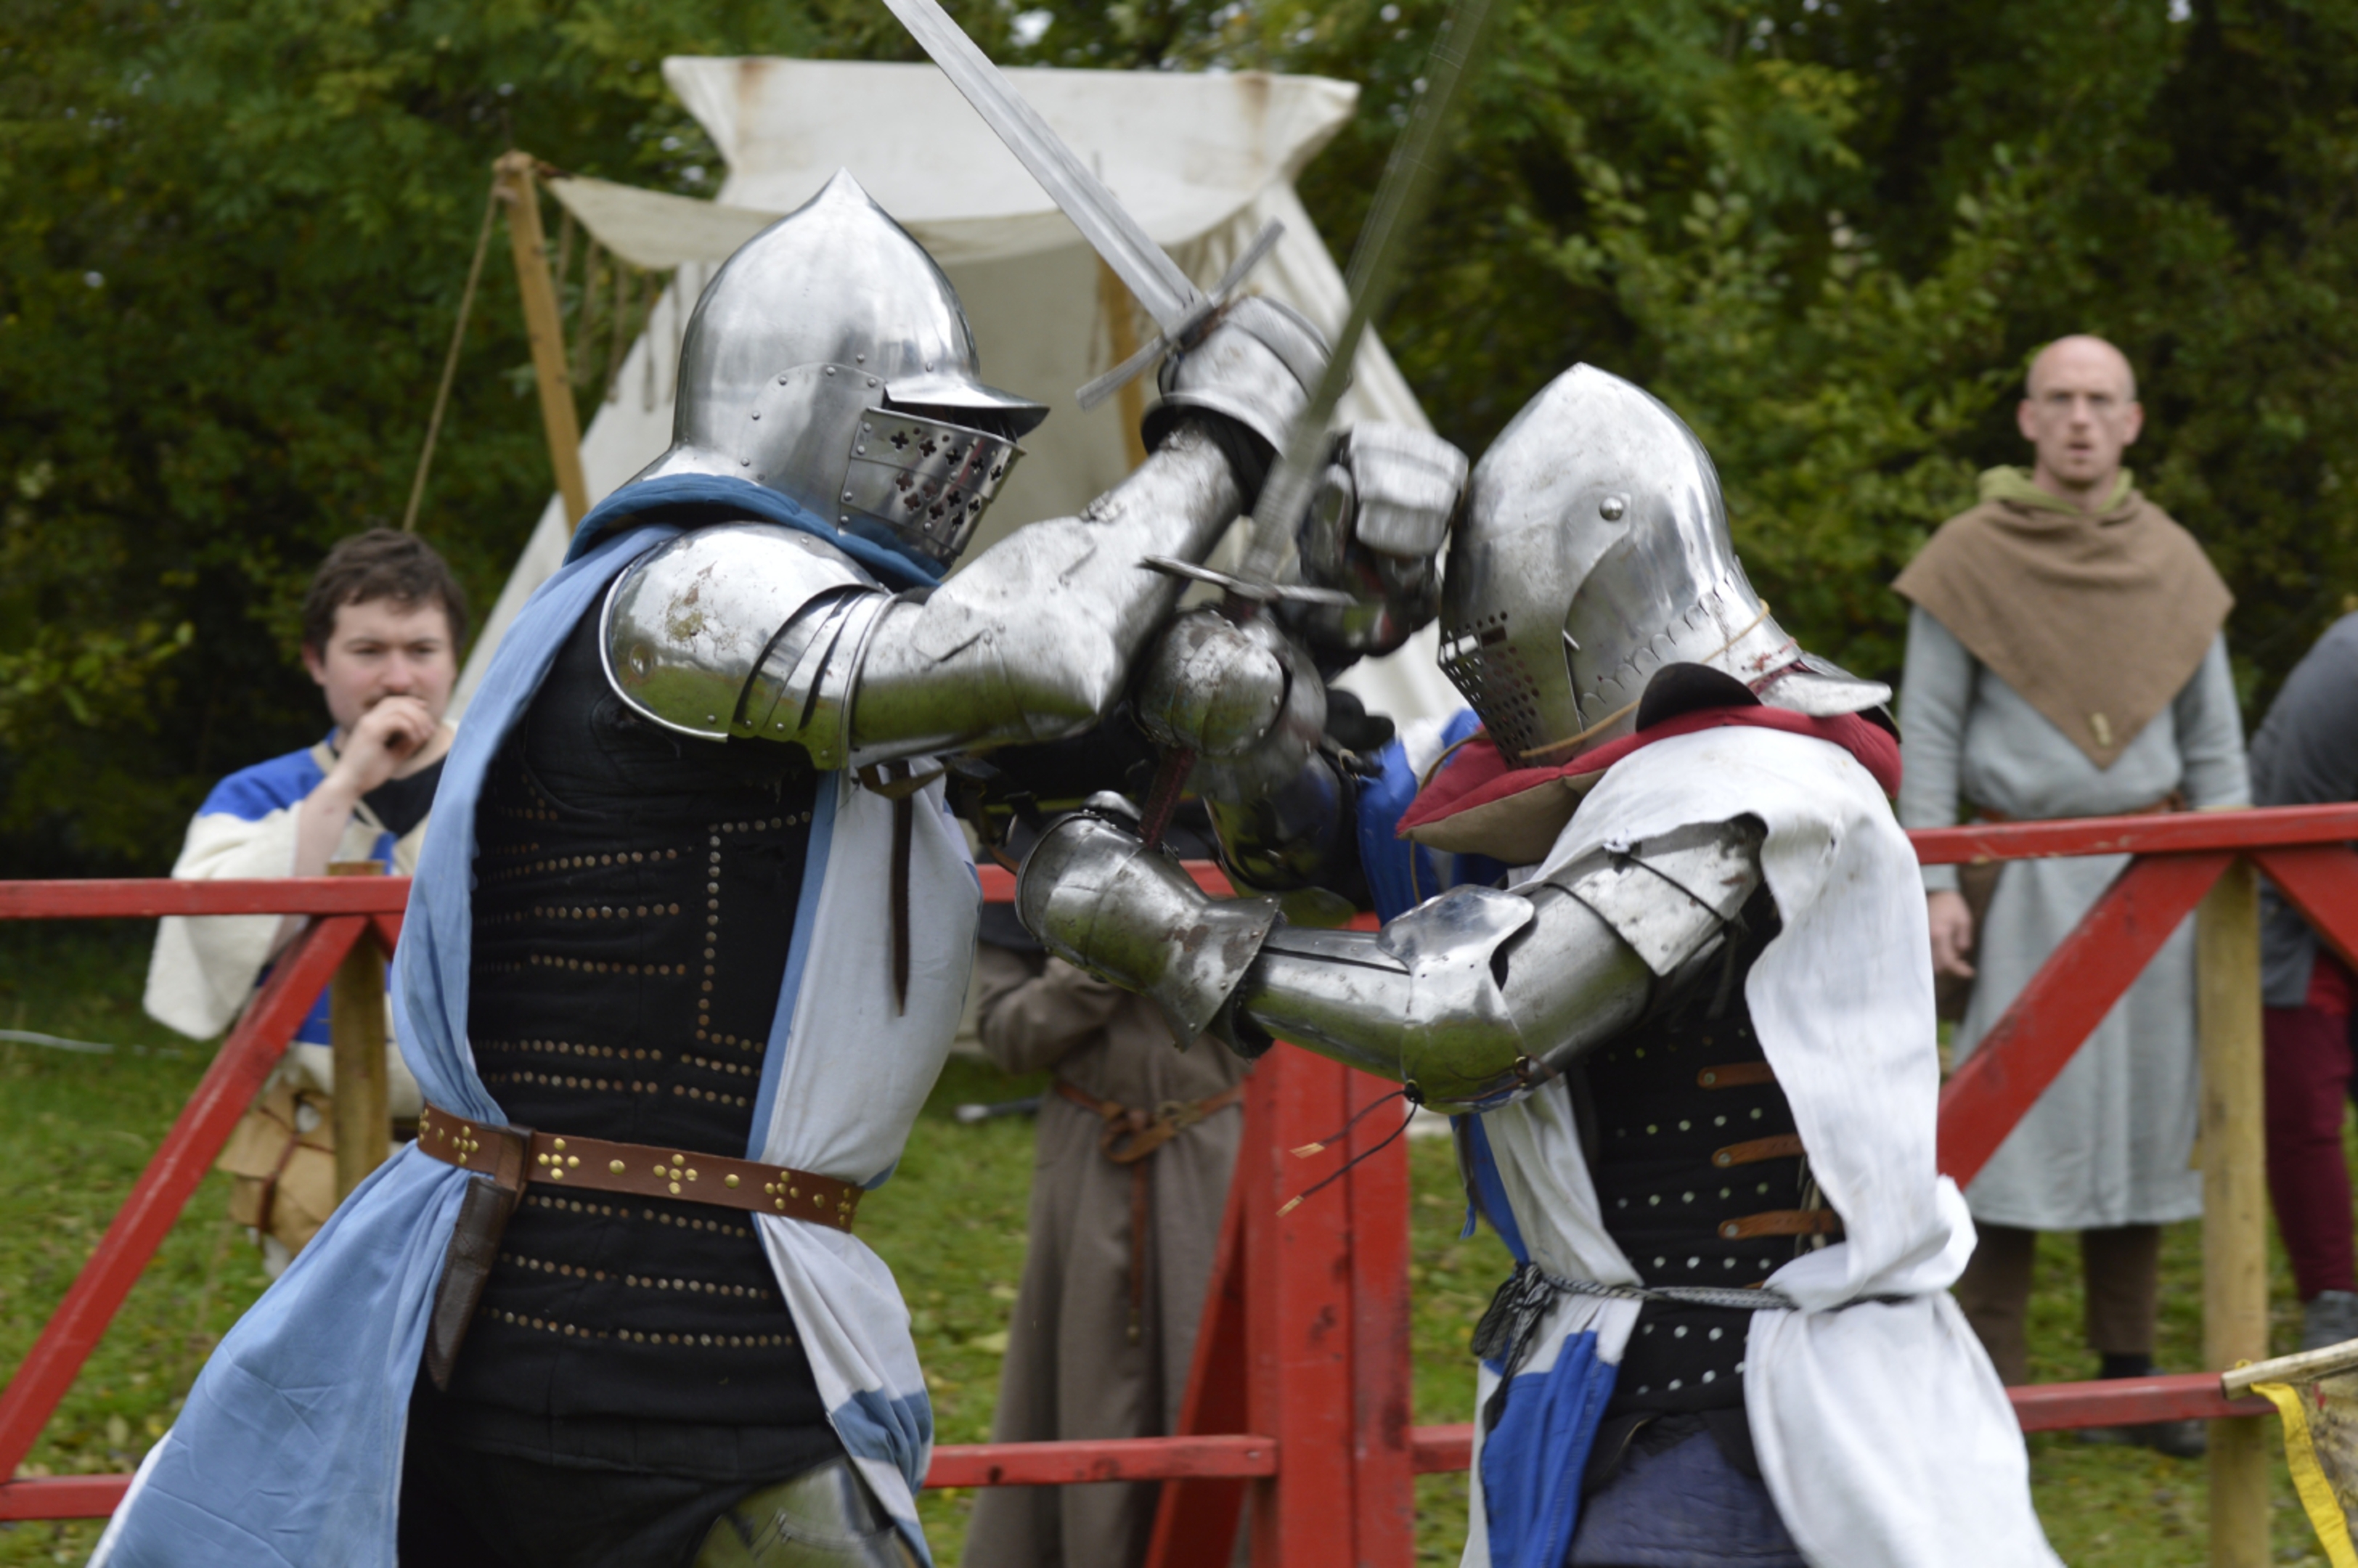 Knights fighting ahead of the International Medieval Combat Federation World Championships at Scone Palace.